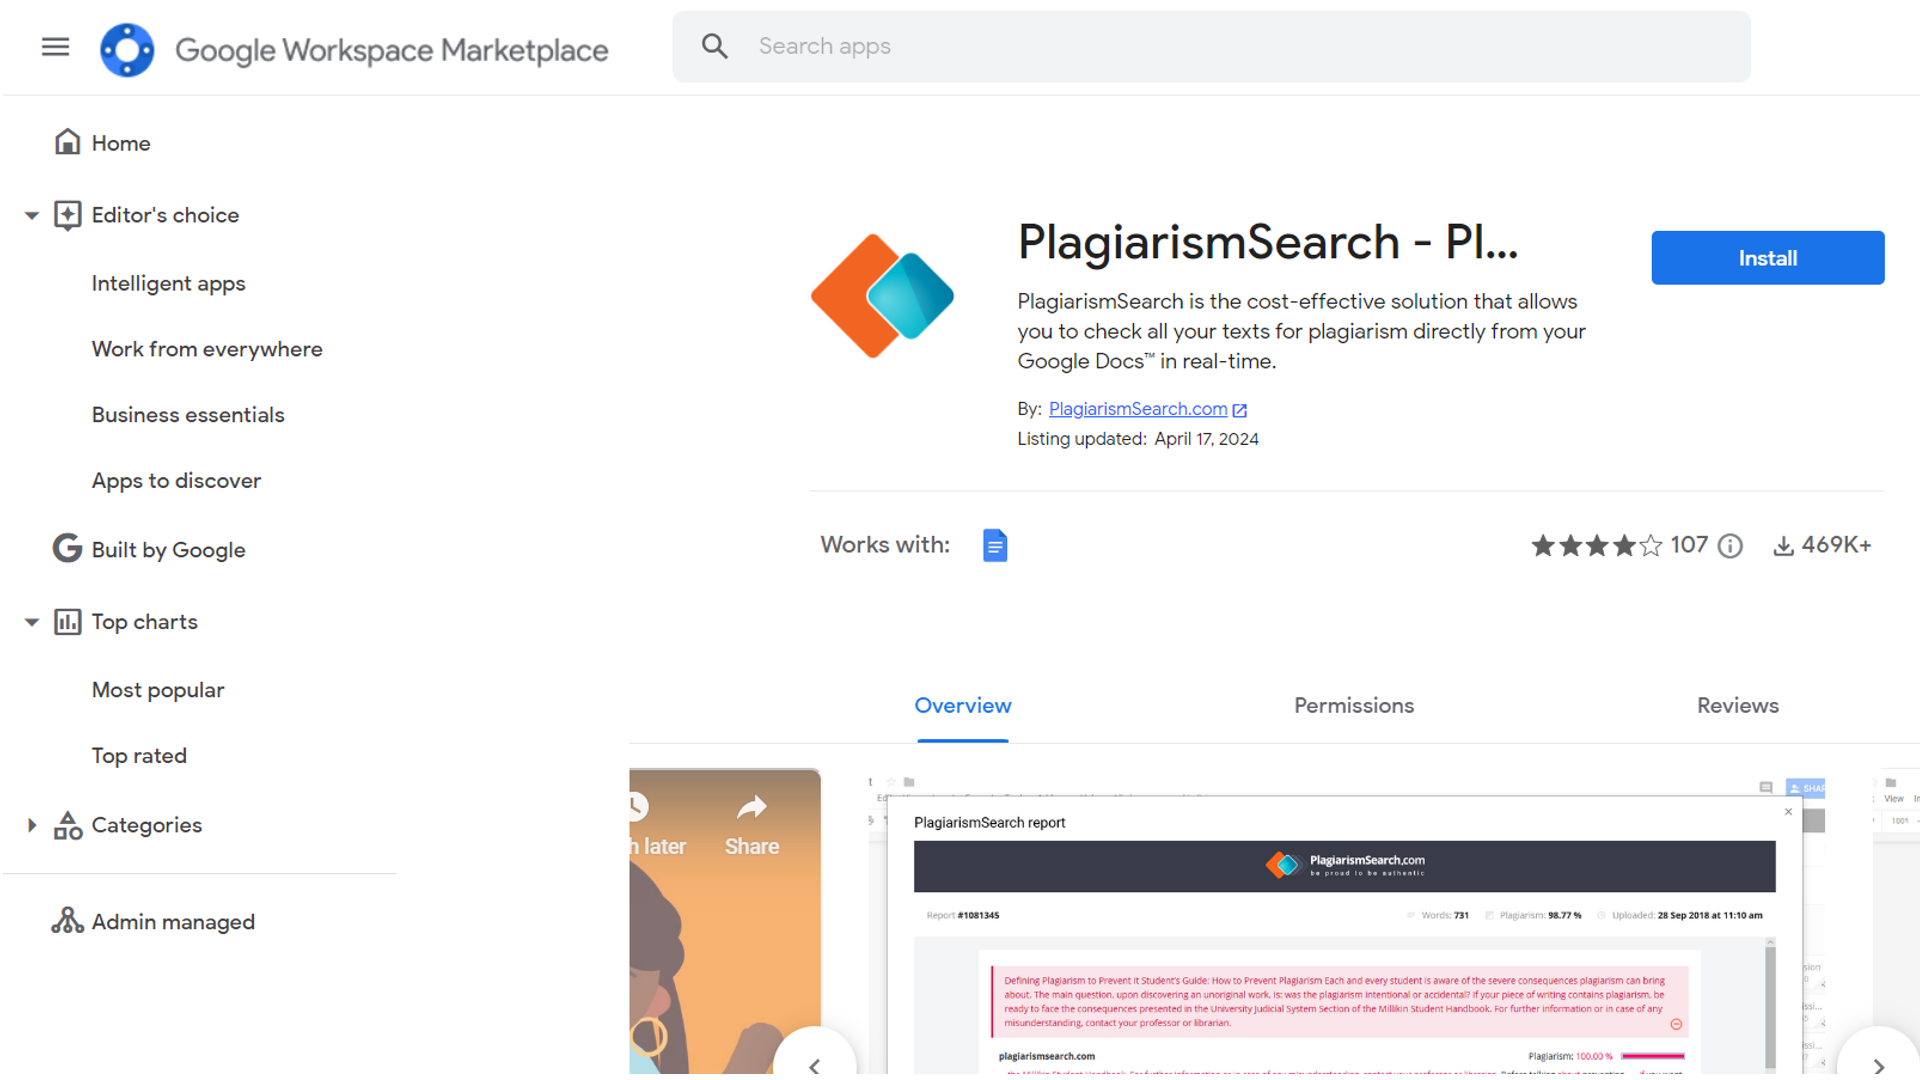 Install PlagiarismSearch